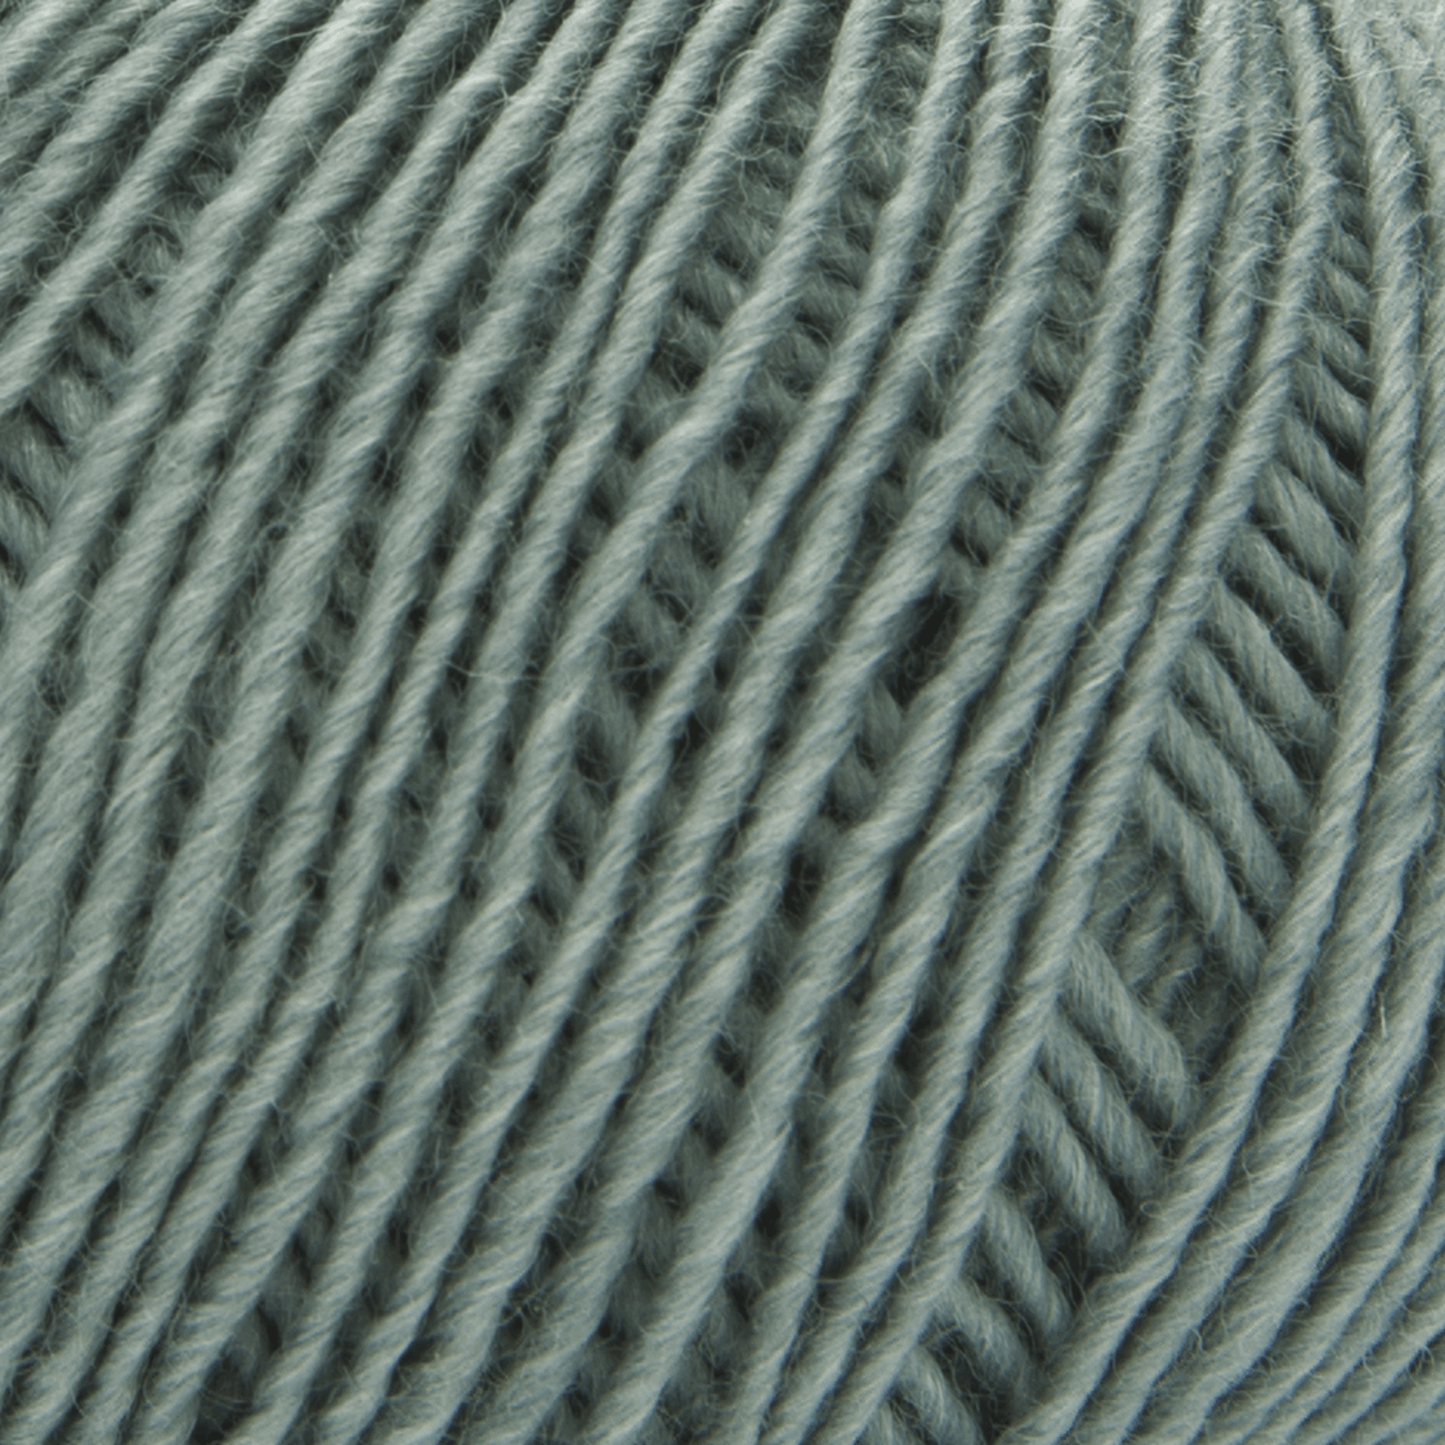 ggh Lacy 25g, green-gray, 96016, color 9